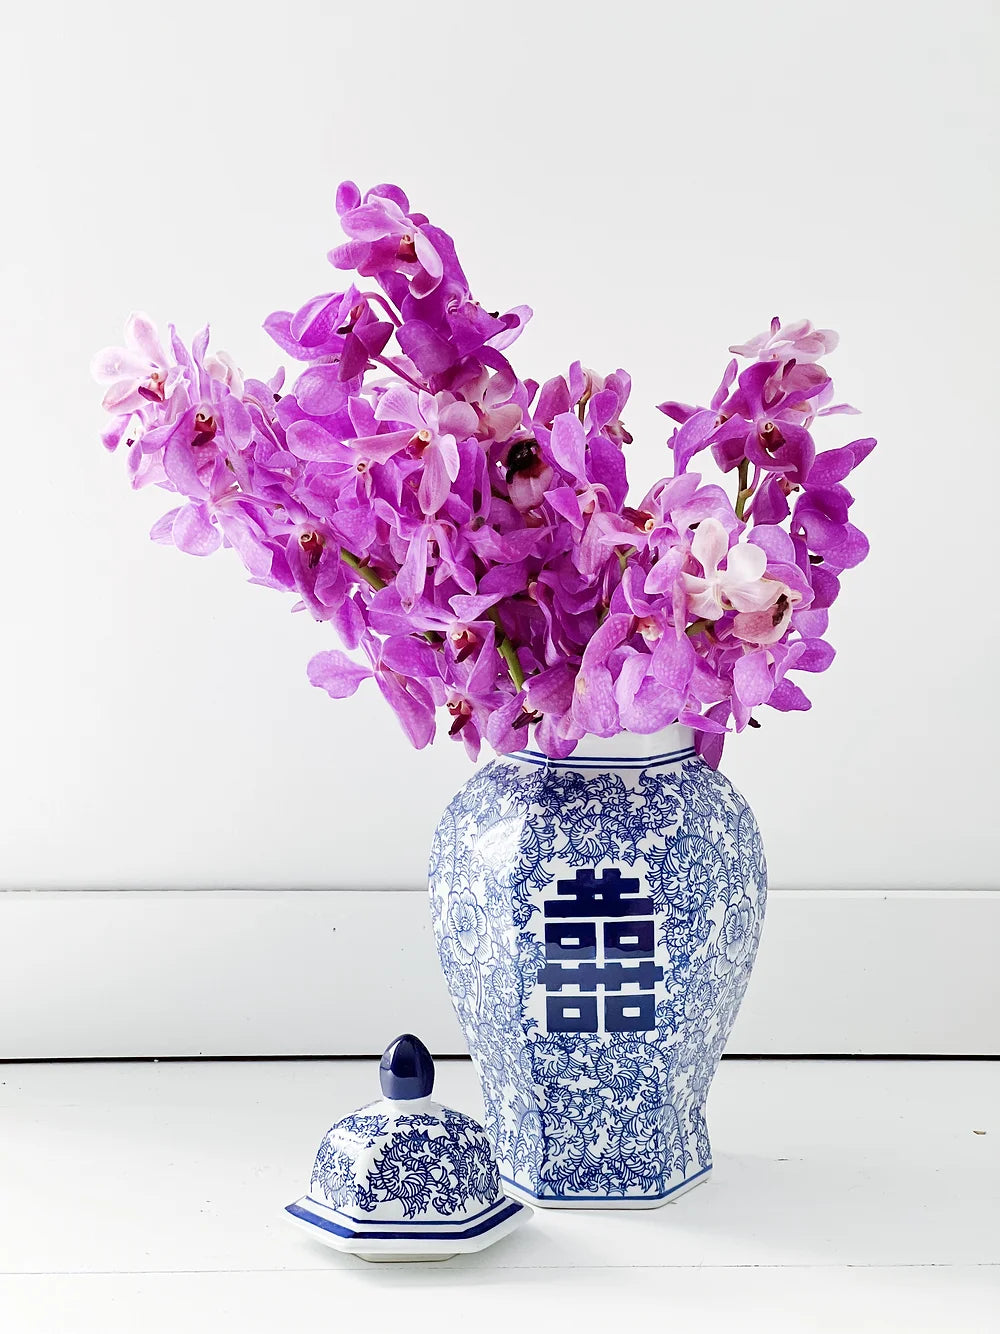 blue and white double happiness ginger jar with purple orchids